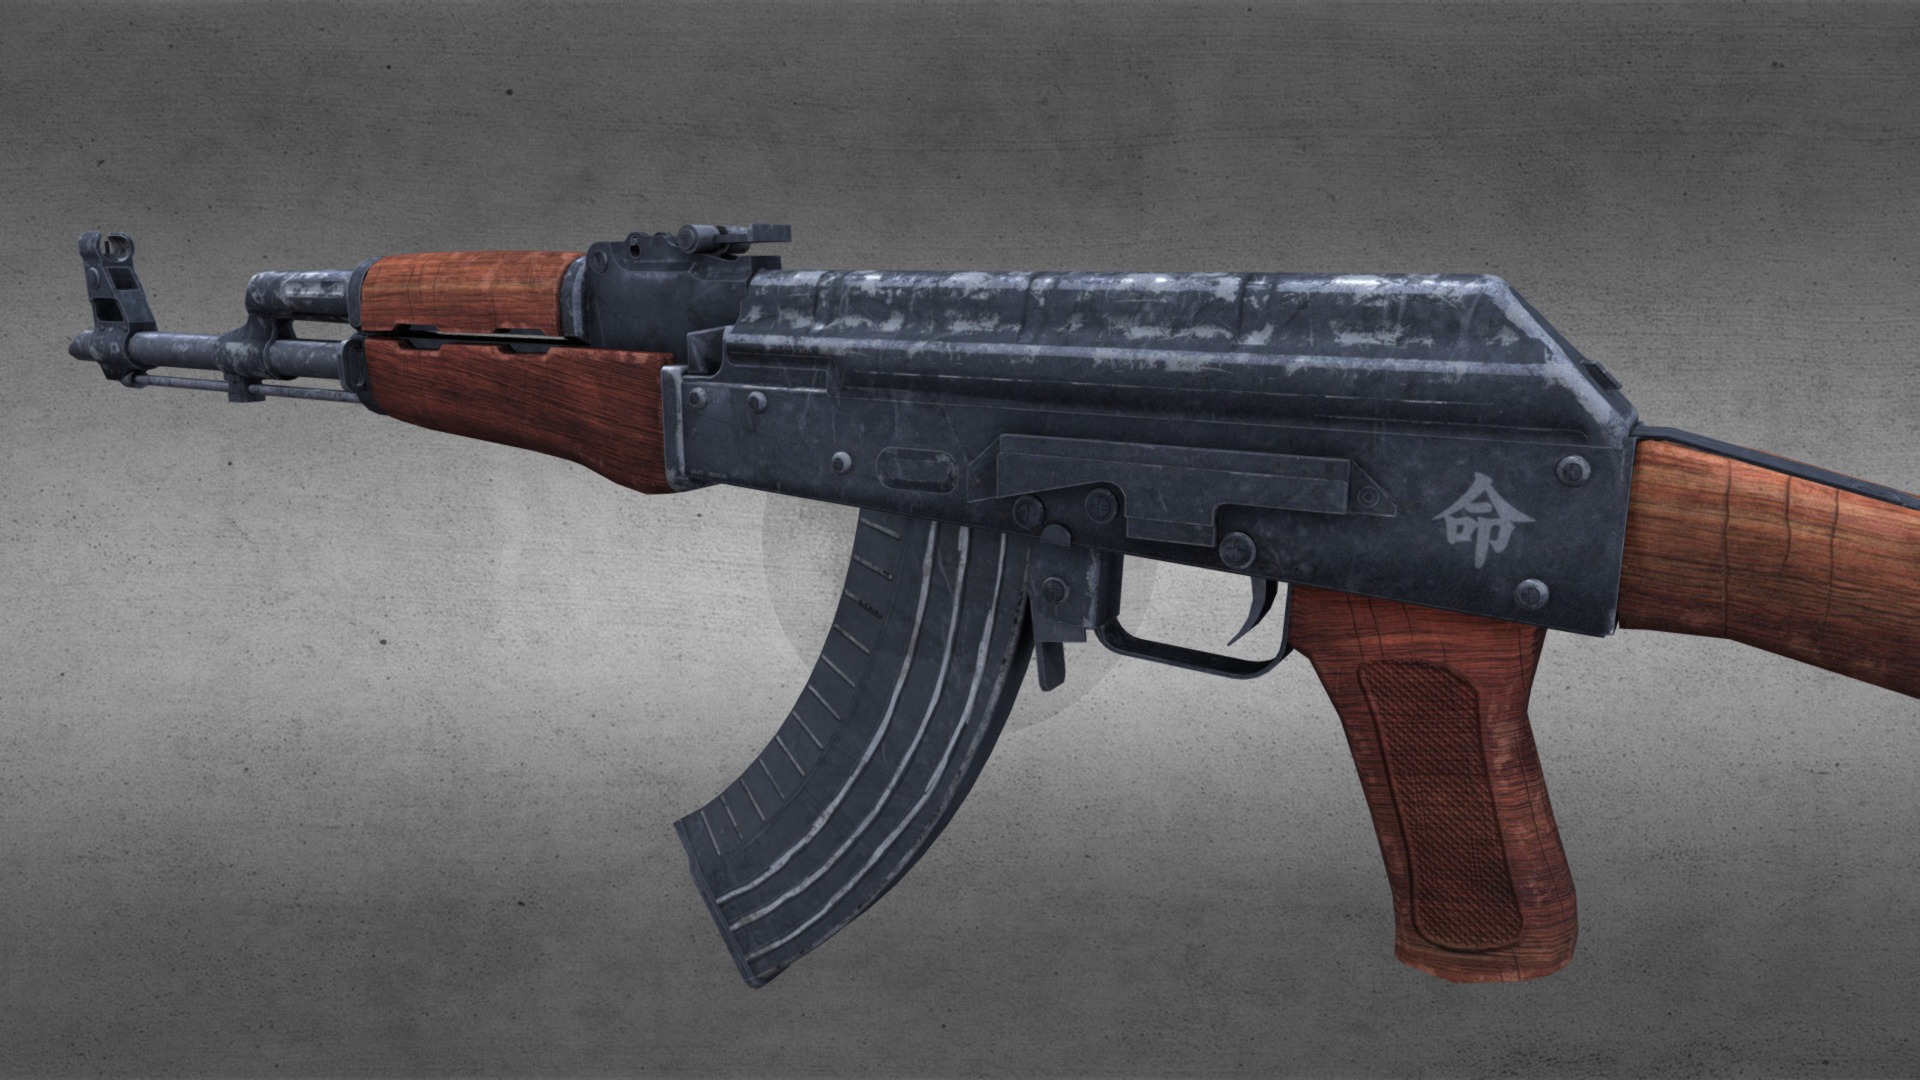 3D model AK47 – Diffuse Only - This is a 3D model of the AK47 - Diffuse Only. The 3D model is about a gun with a strap.